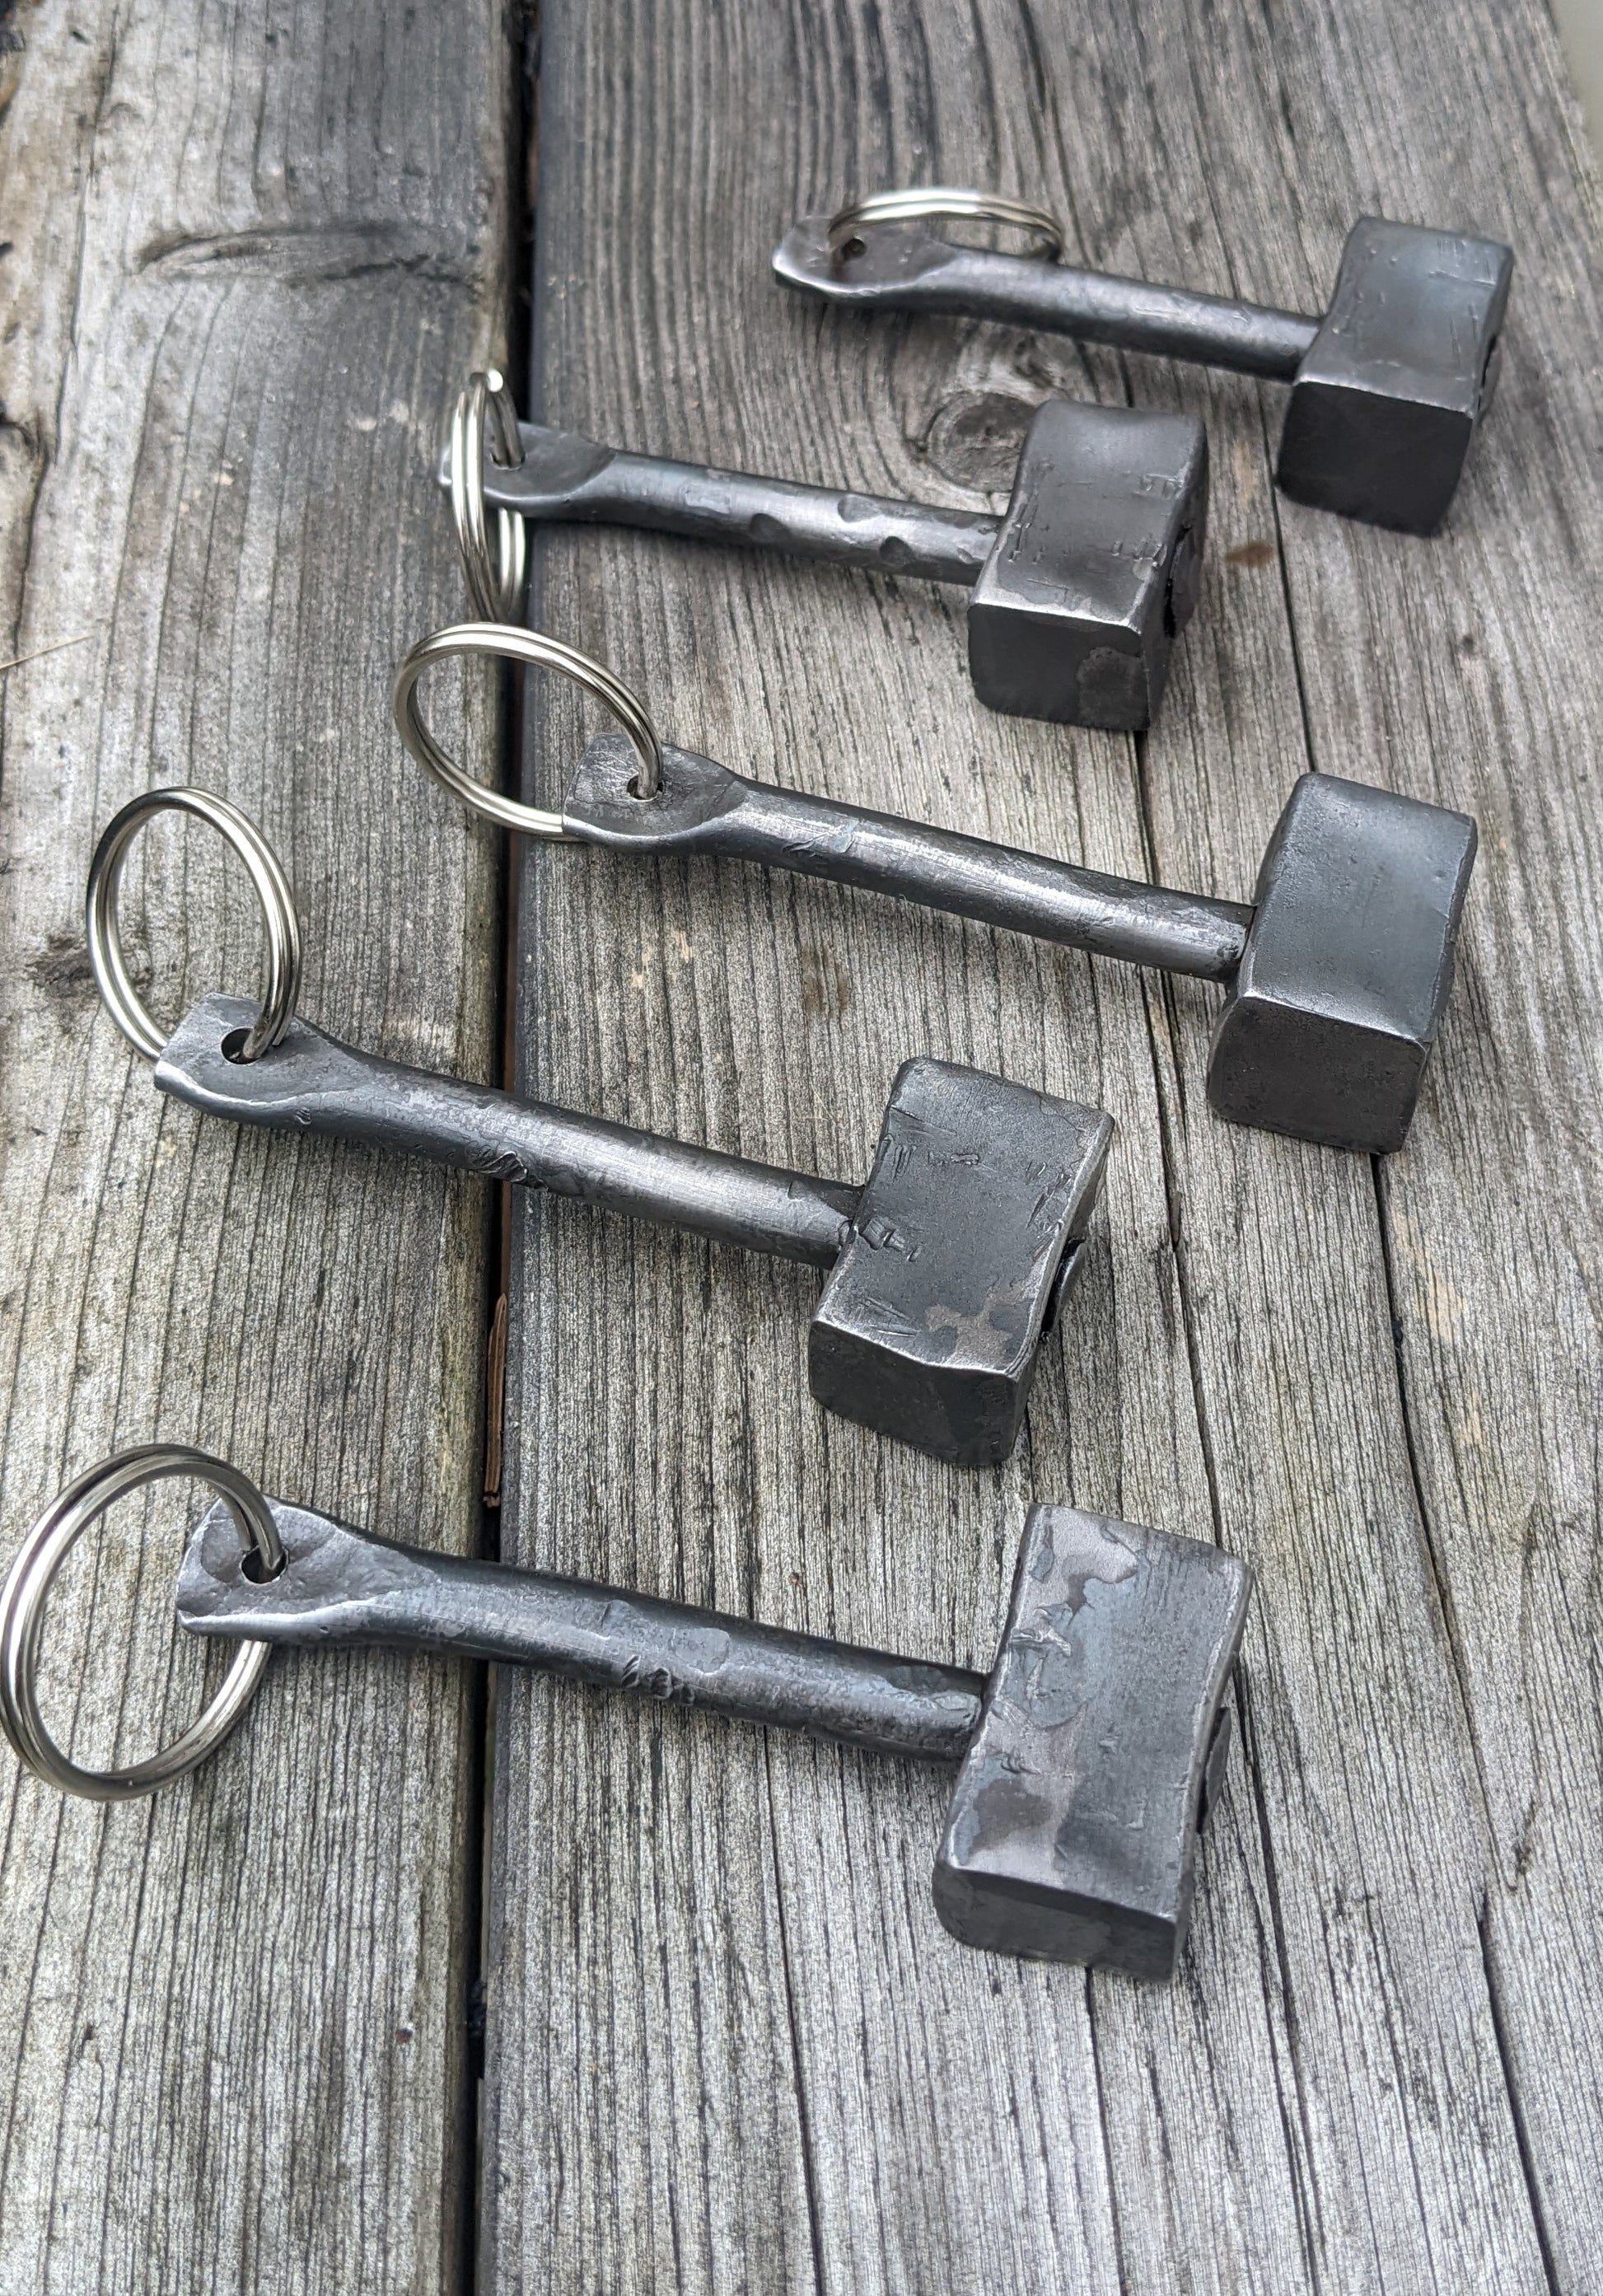 Assorted Styles of Hand Forged Thor's Hammer at Christ Centered Ironworks